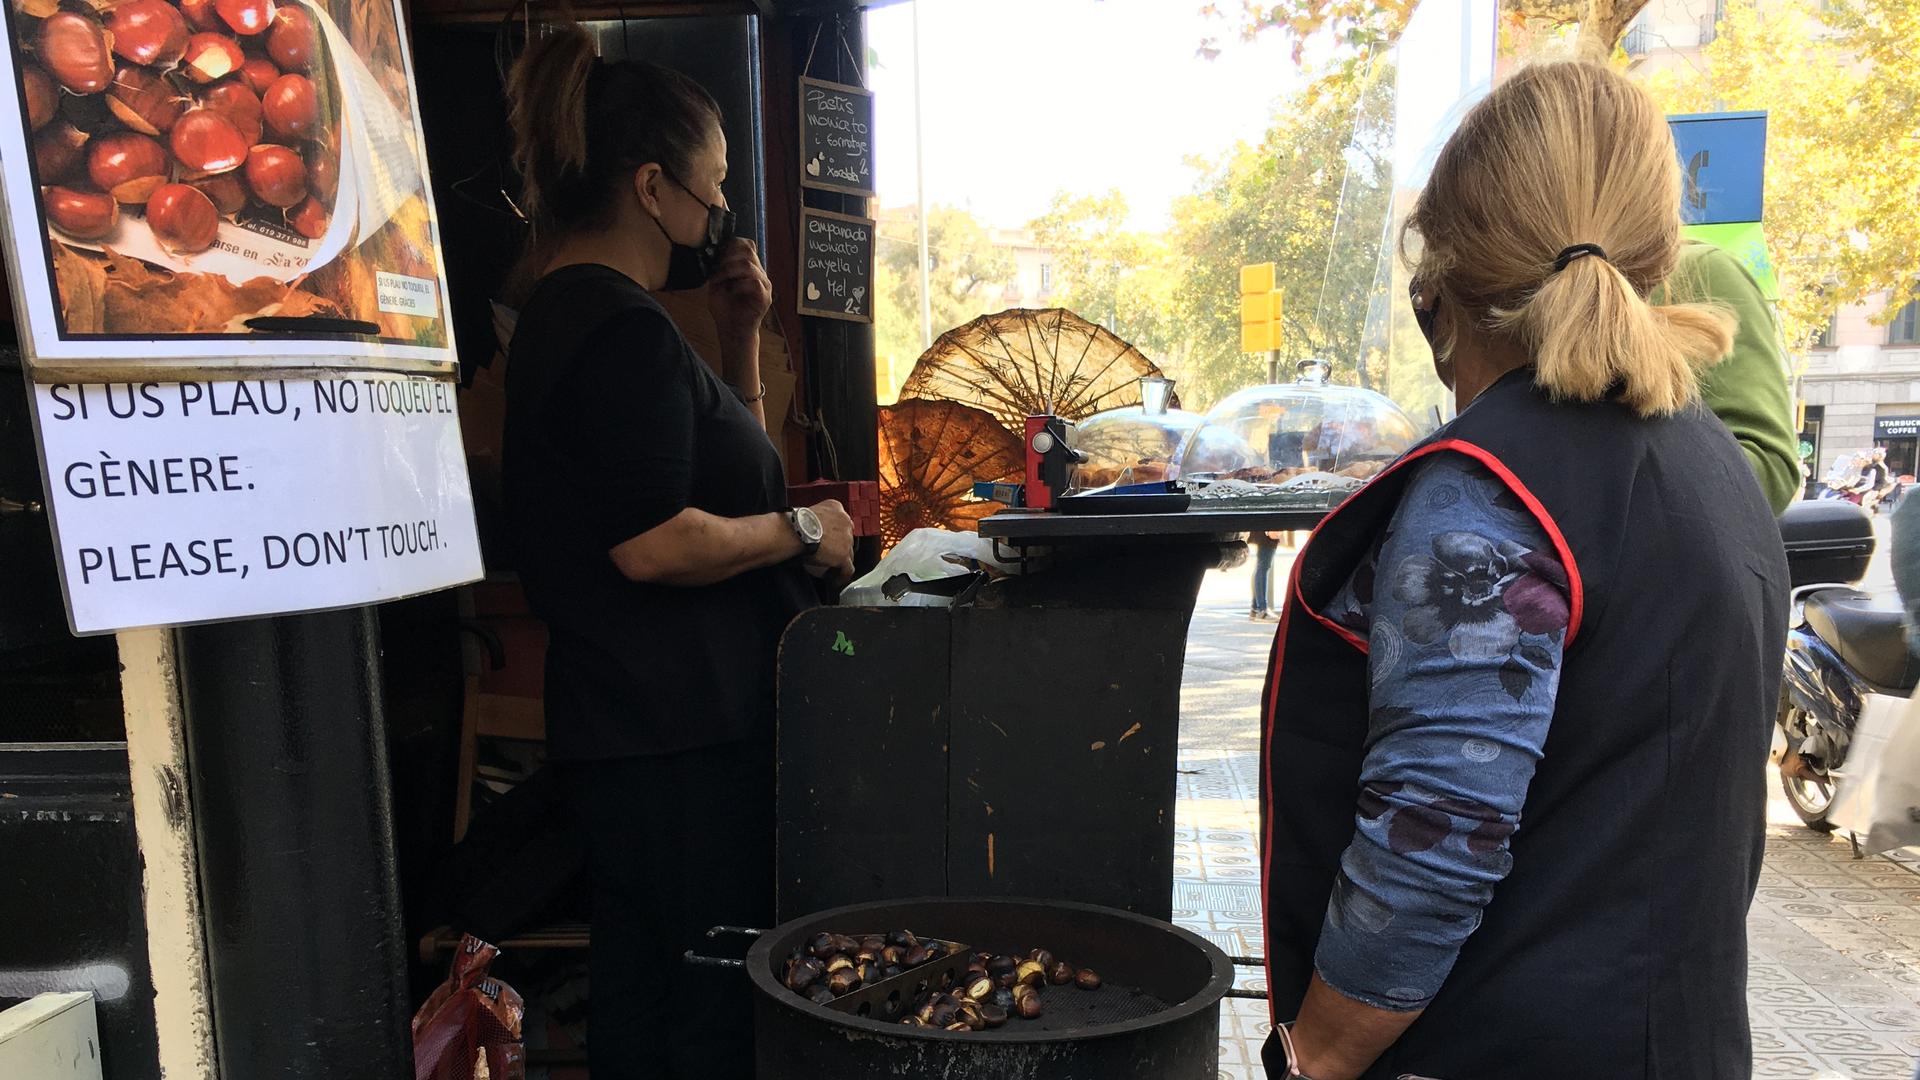 A woman wearing a face mask sells roasted chestnuts as another woman wearing a blue apron minds the chestnuts.